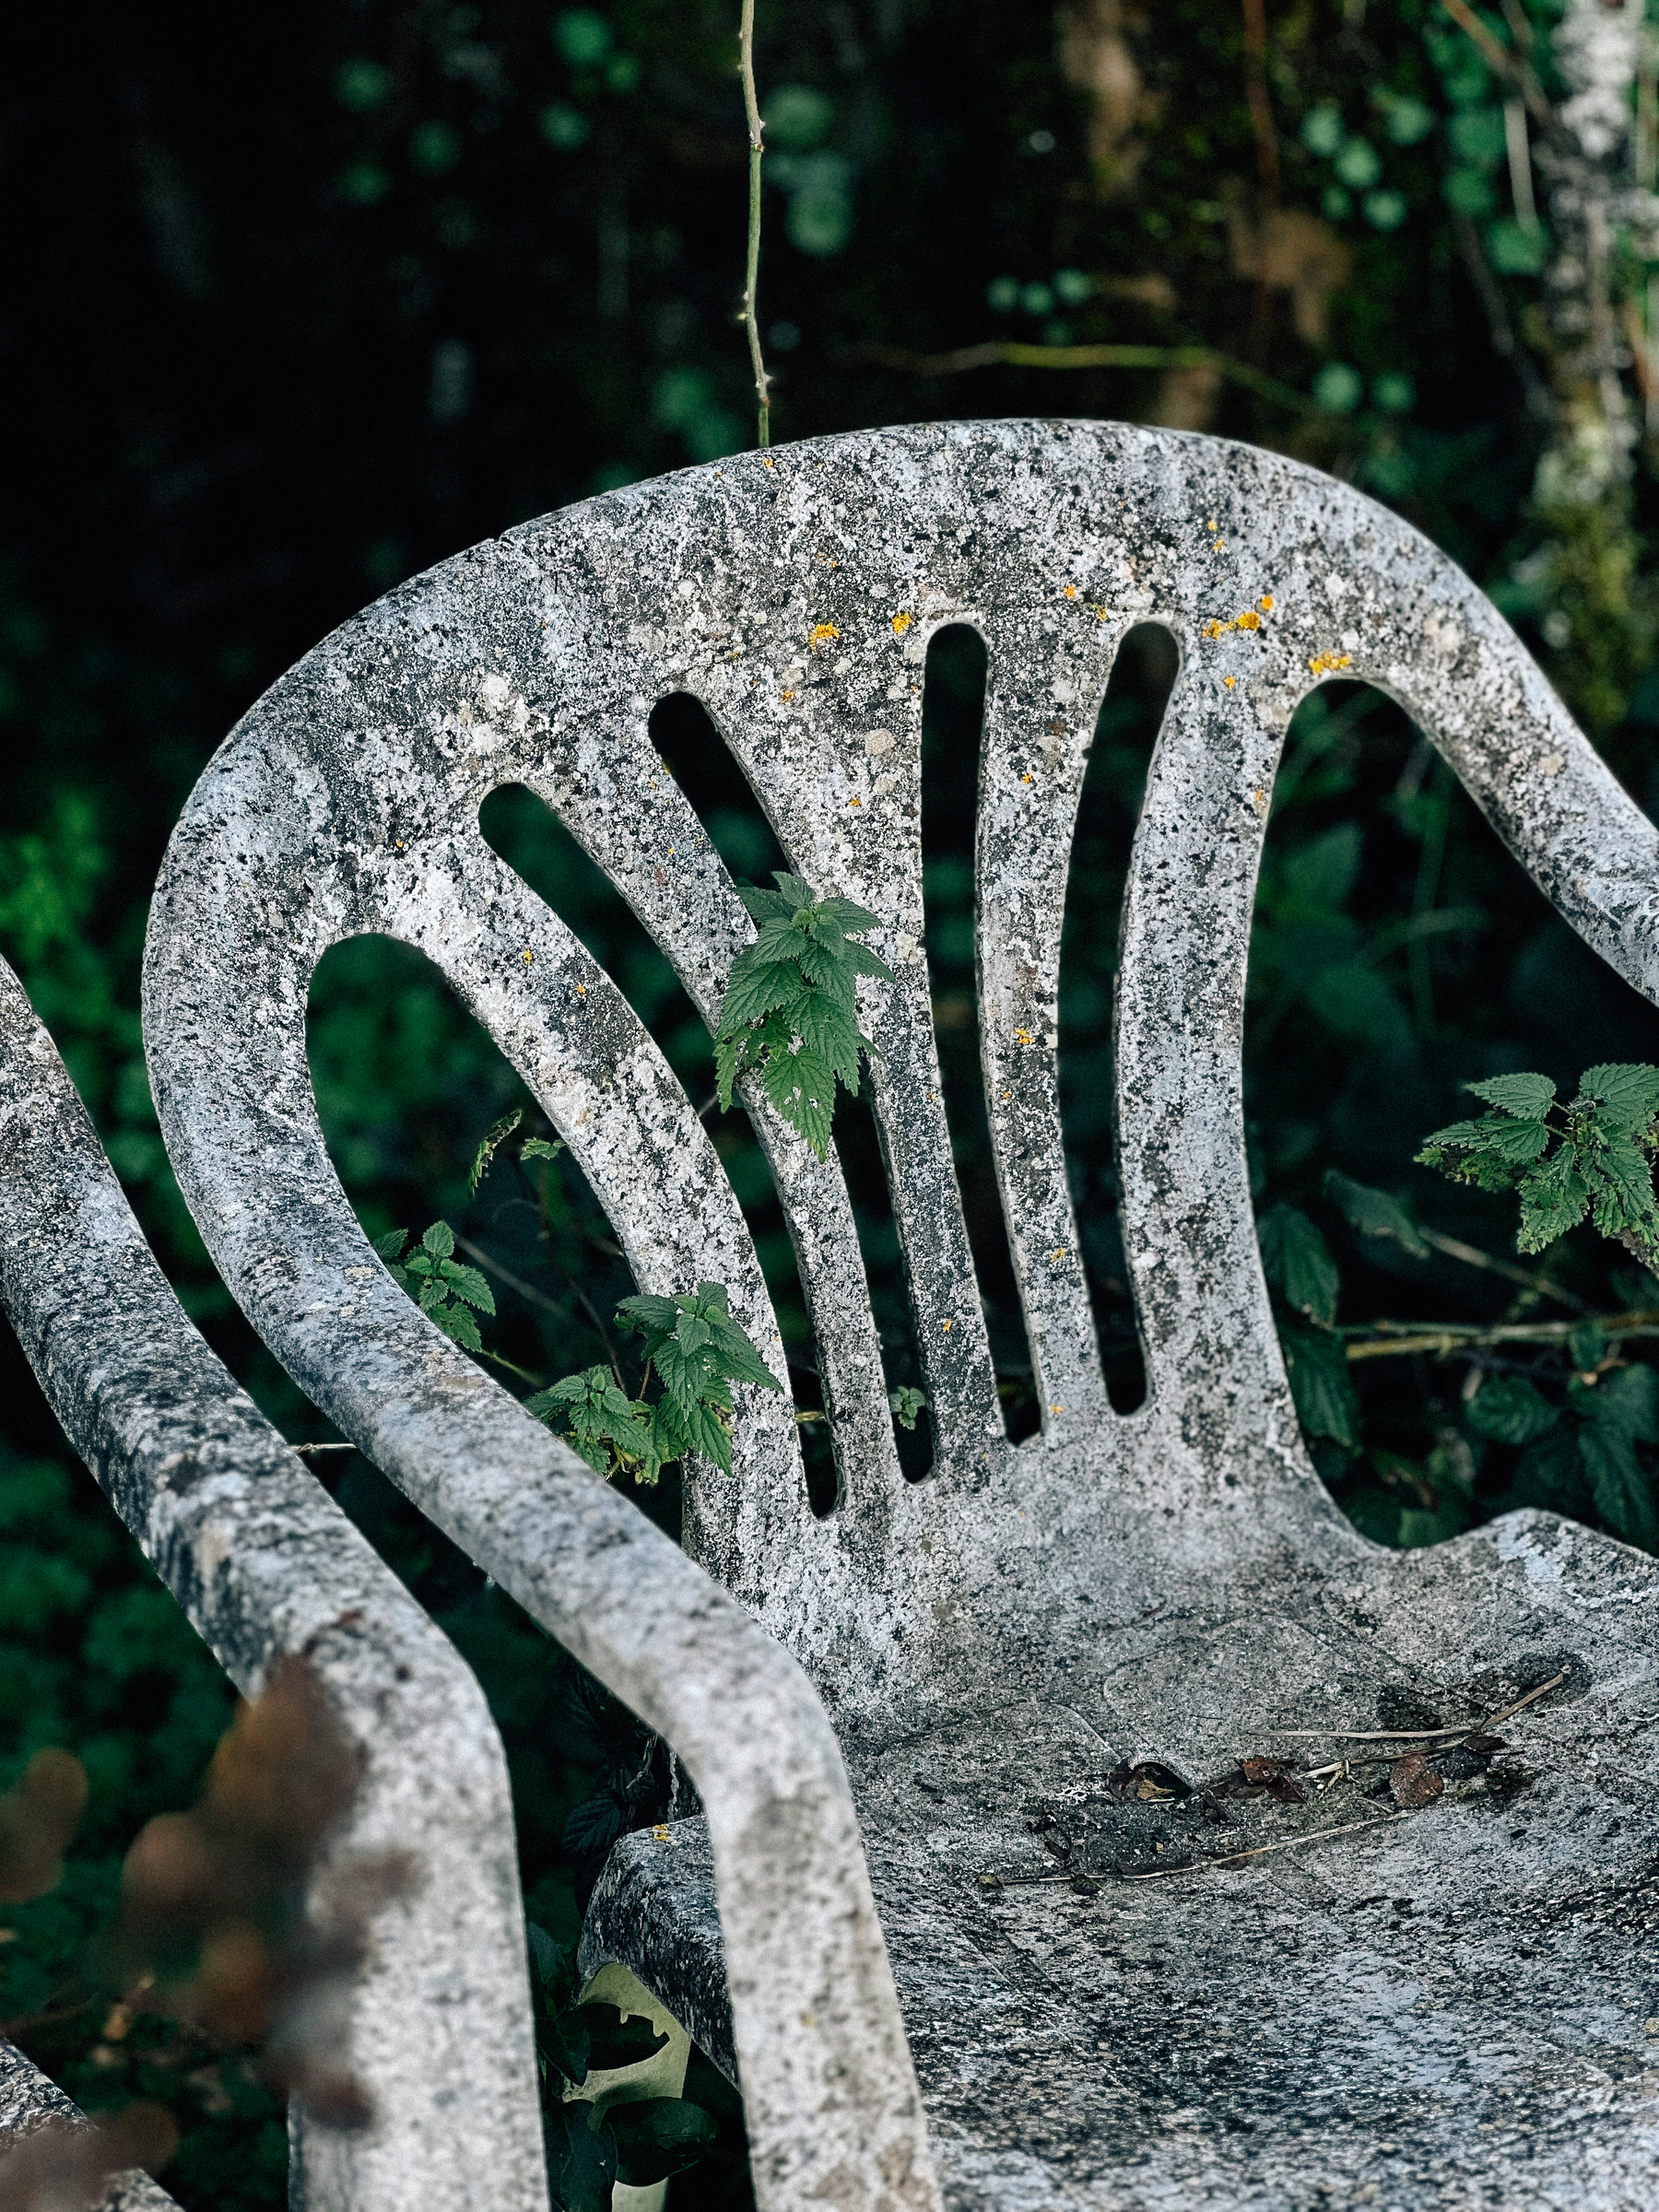 A weathered plastic chair with lichen and moss growth, surrounded by green foliage, indicating neglect and exposure to the elements.